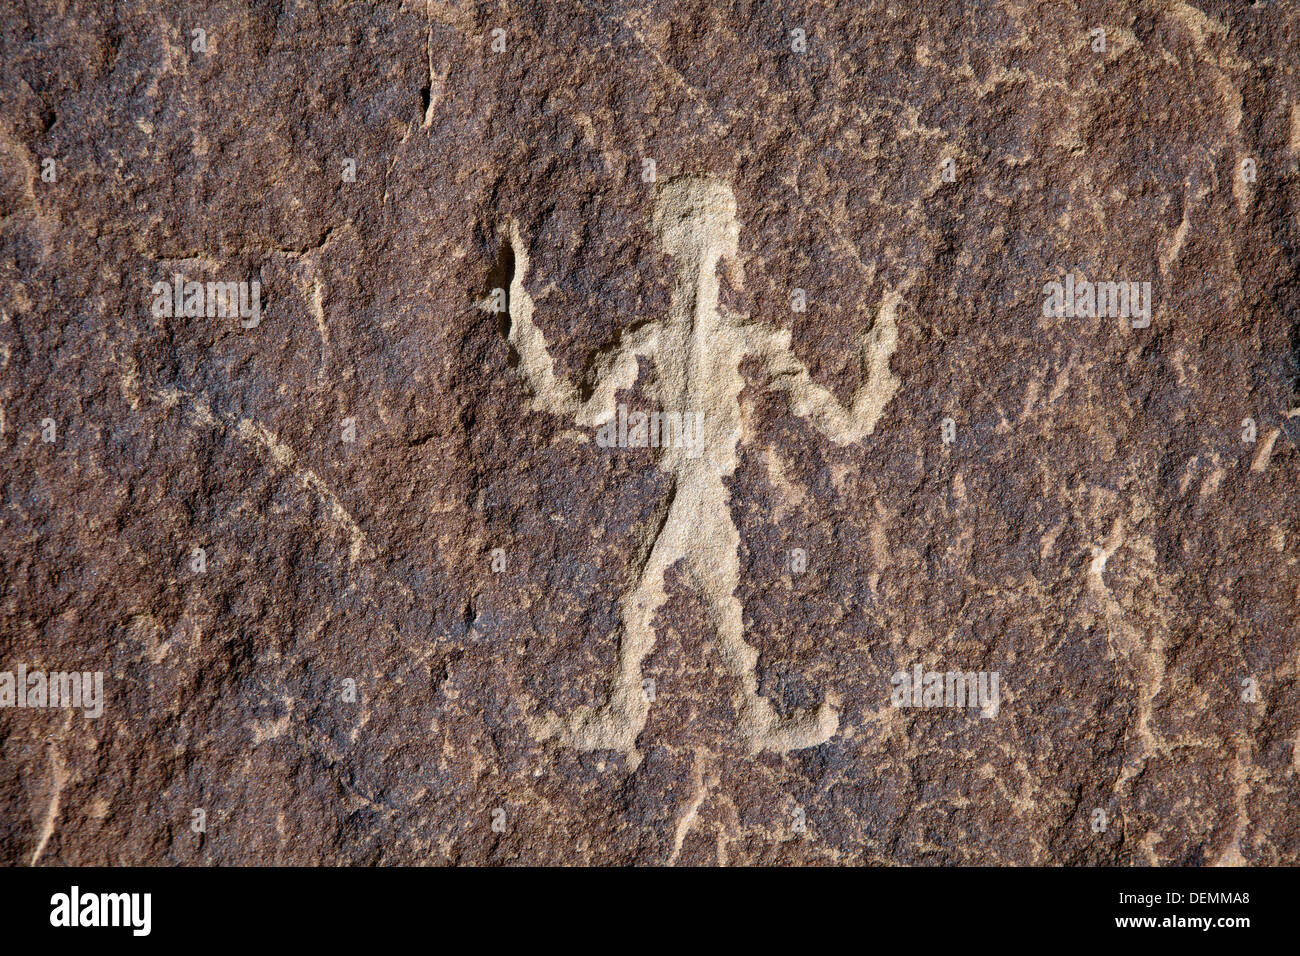 Petroglyphs near Casa Chiquita in Chaco Culture National Historical Park, New Mexico. Stock Photo